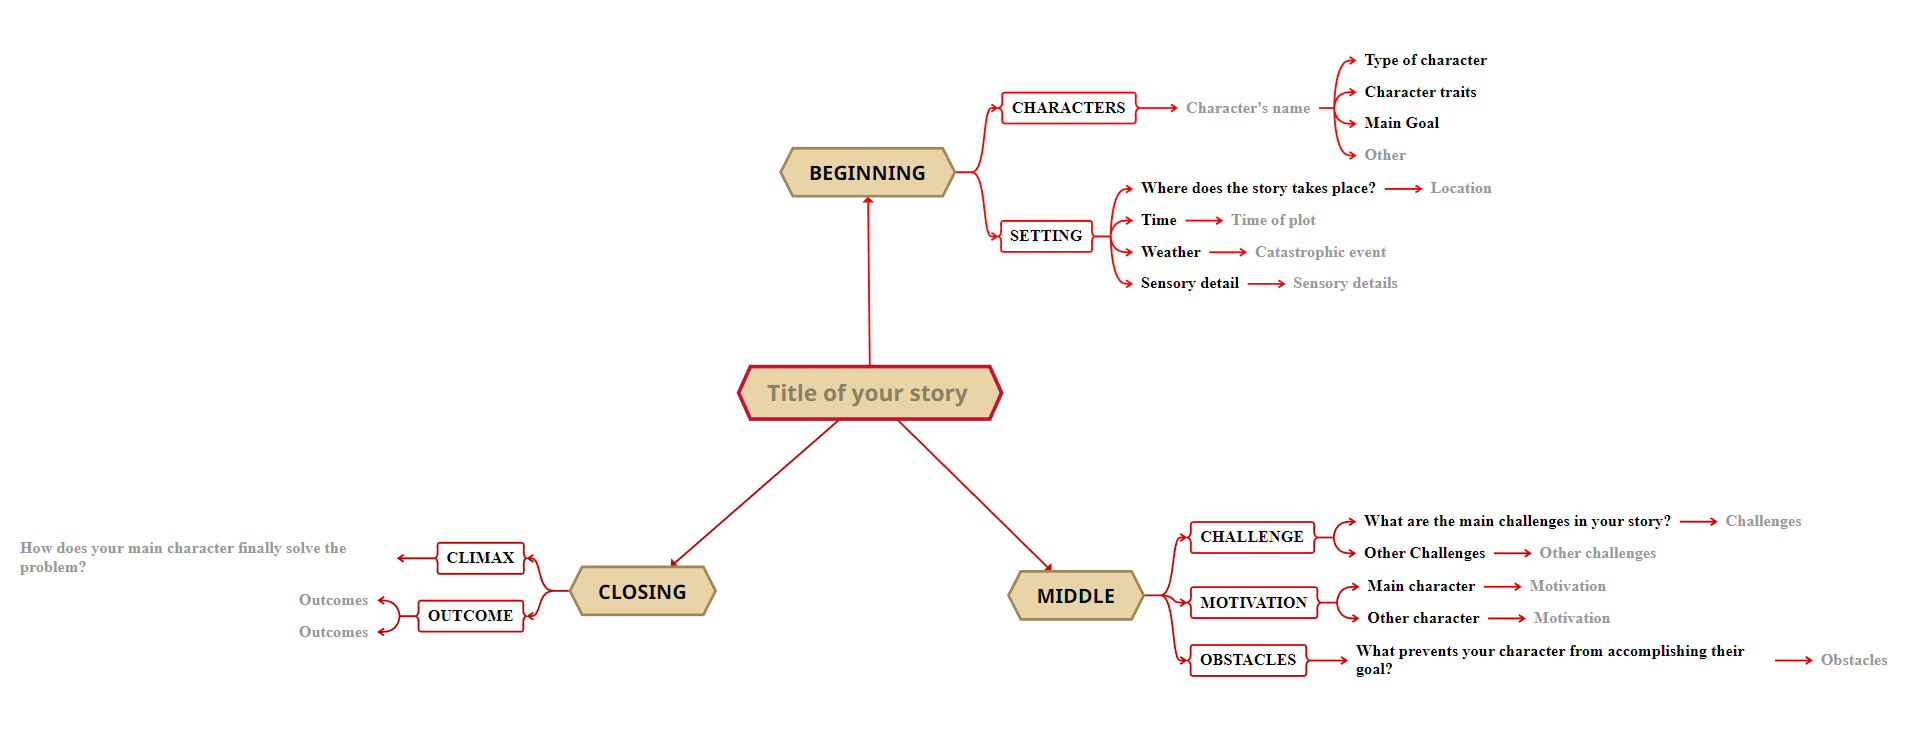 Story summary mind map template for writing